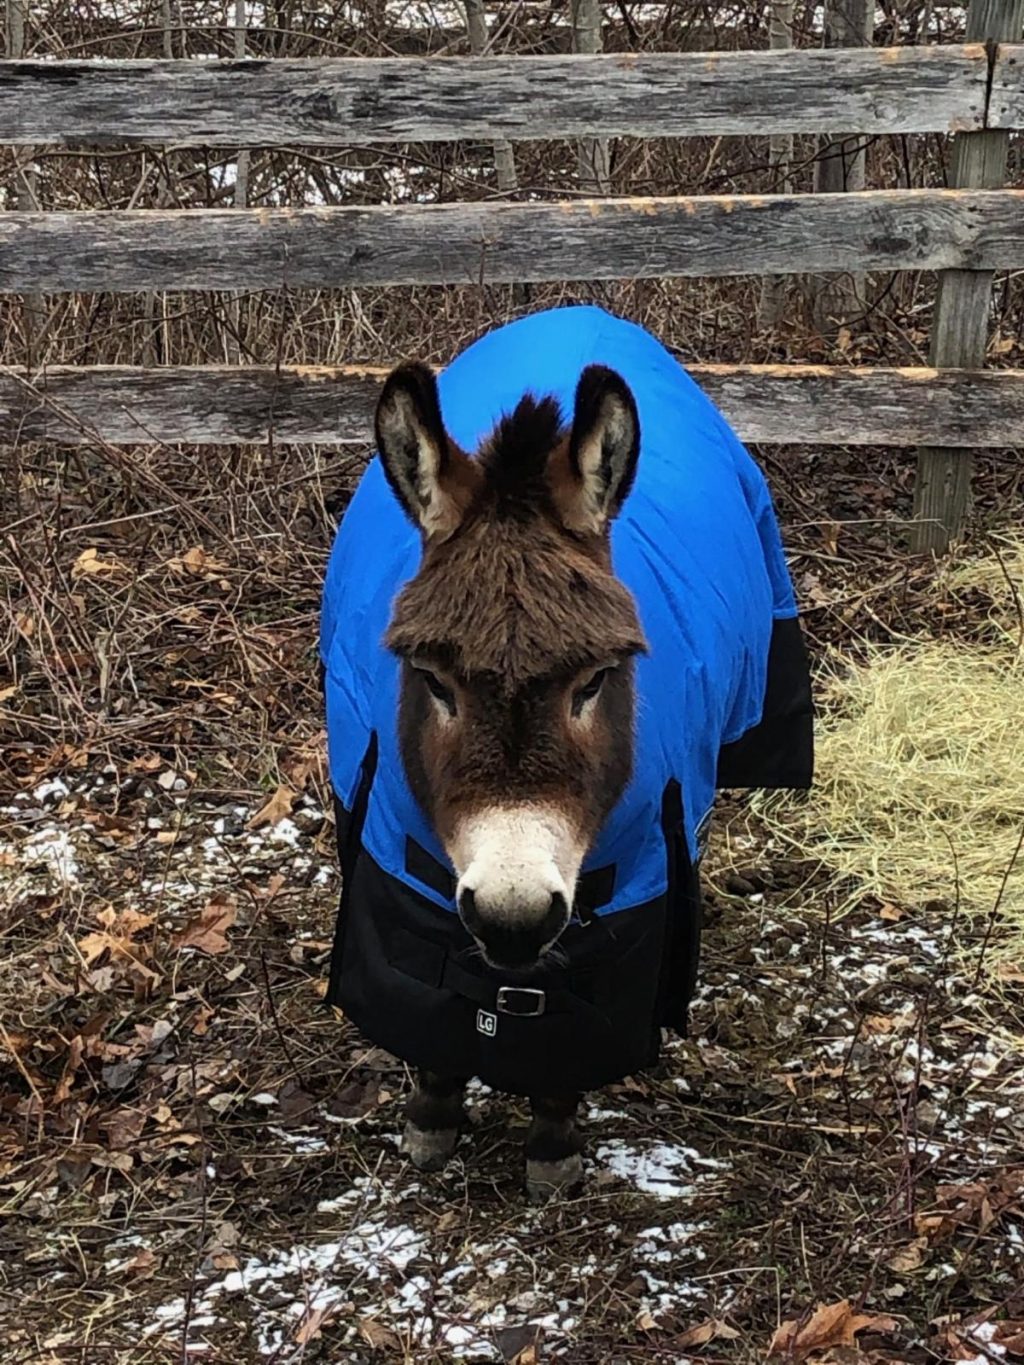 Sheriff, a donkey, standing next to a fence with a blue blanket over him